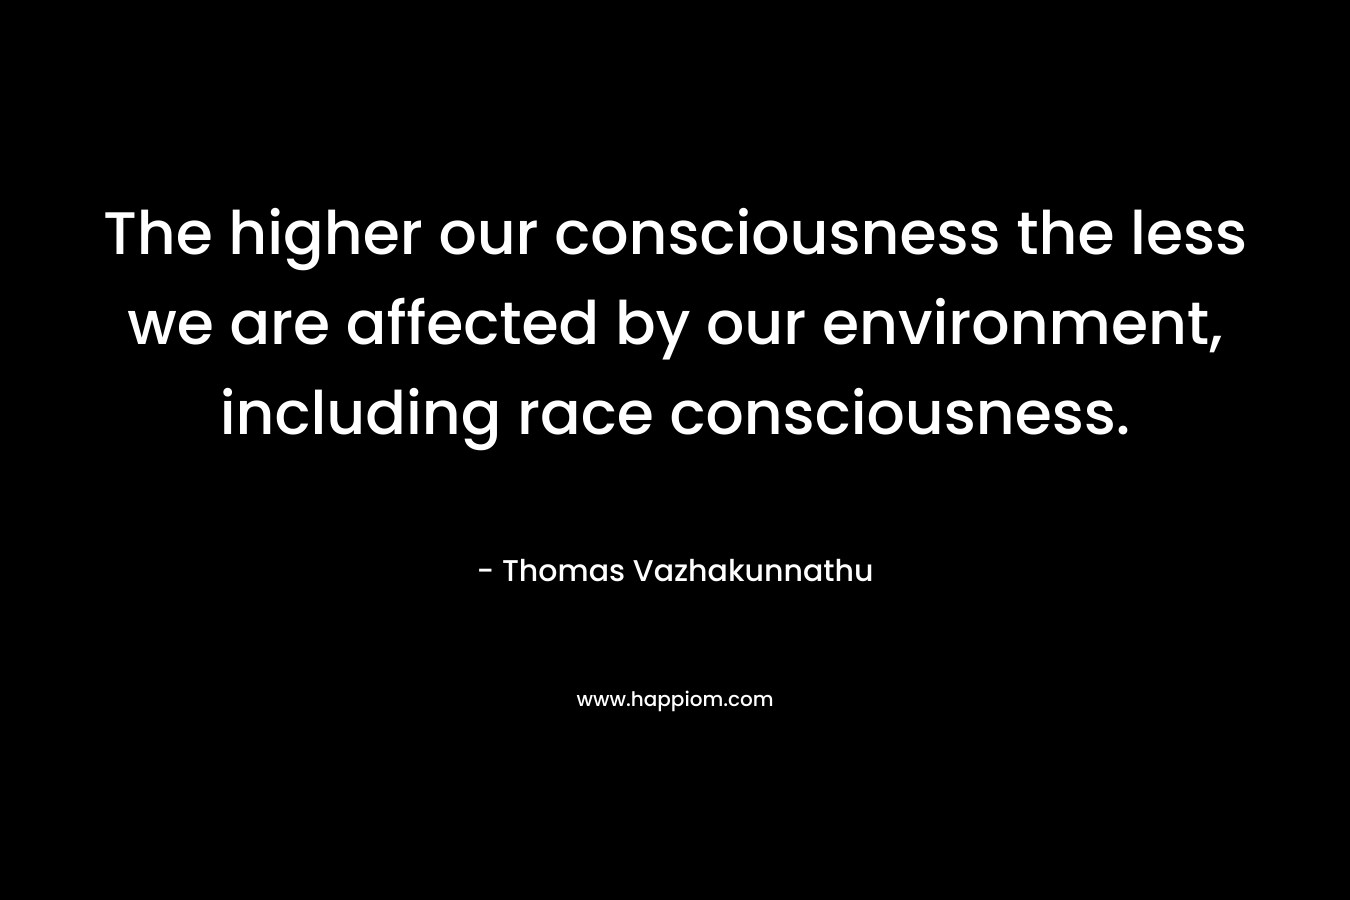 The higher our consciousness the less we are affected by our environment, including race consciousness. – Thomas Vazhakunnathu